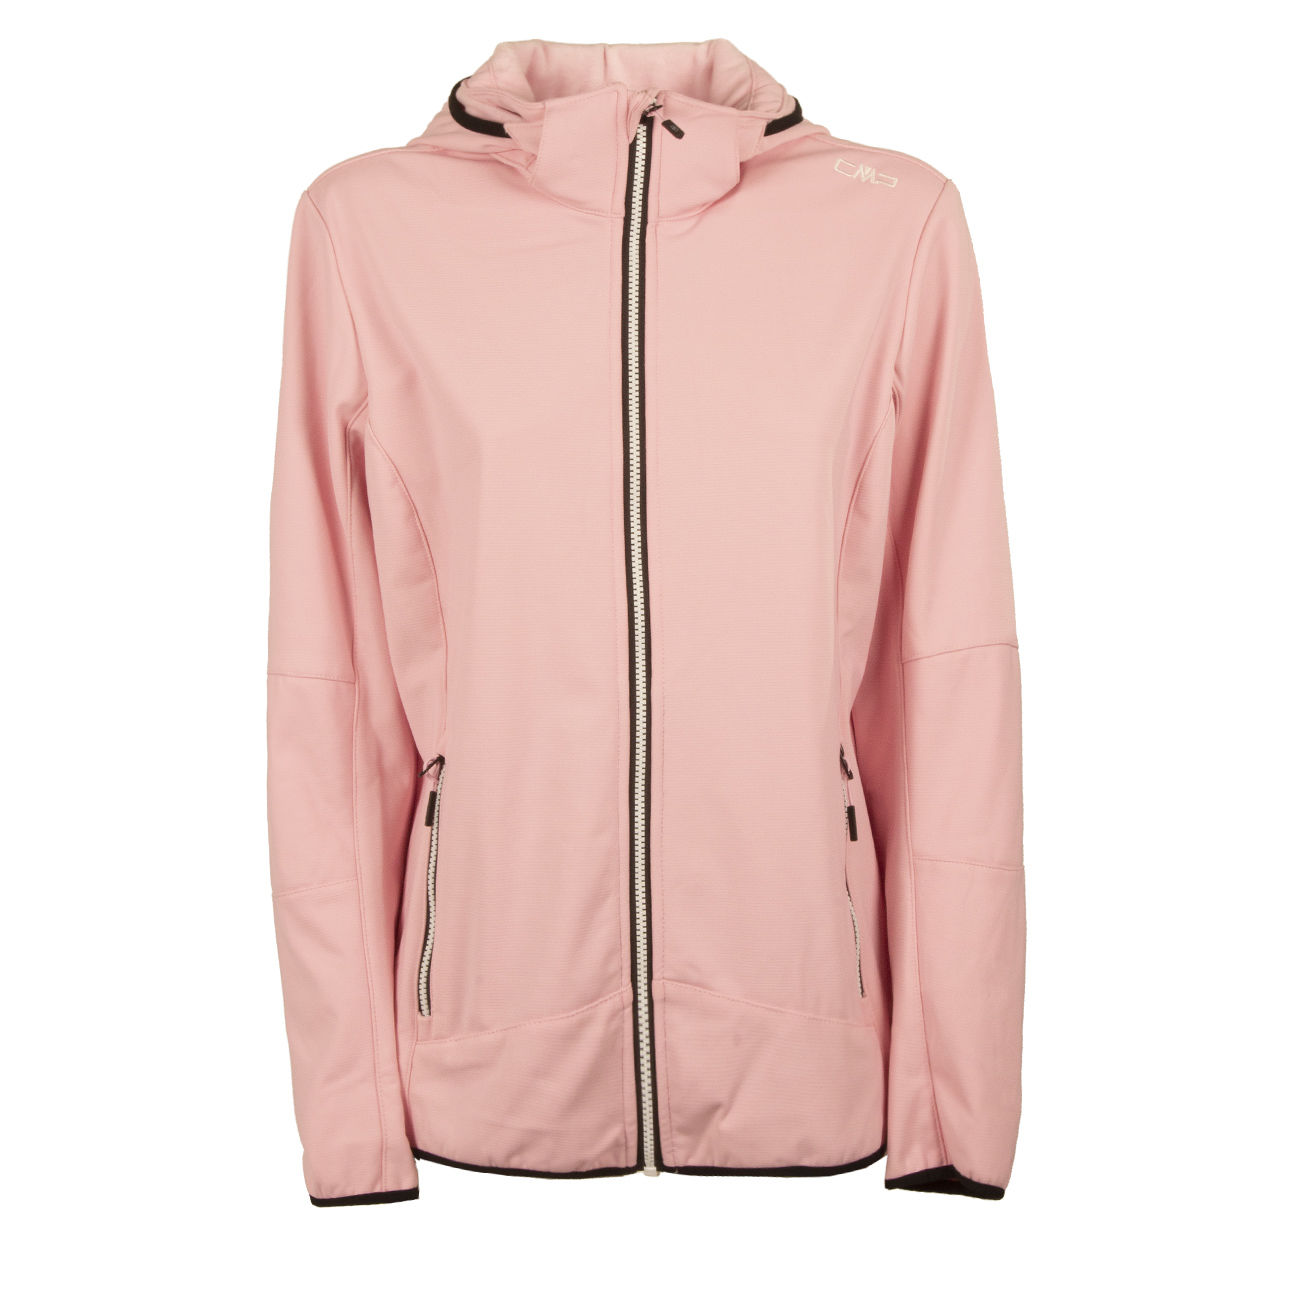 CMP GIACCA Store Mascheroni Pink SOFTSHELL IN Donna 